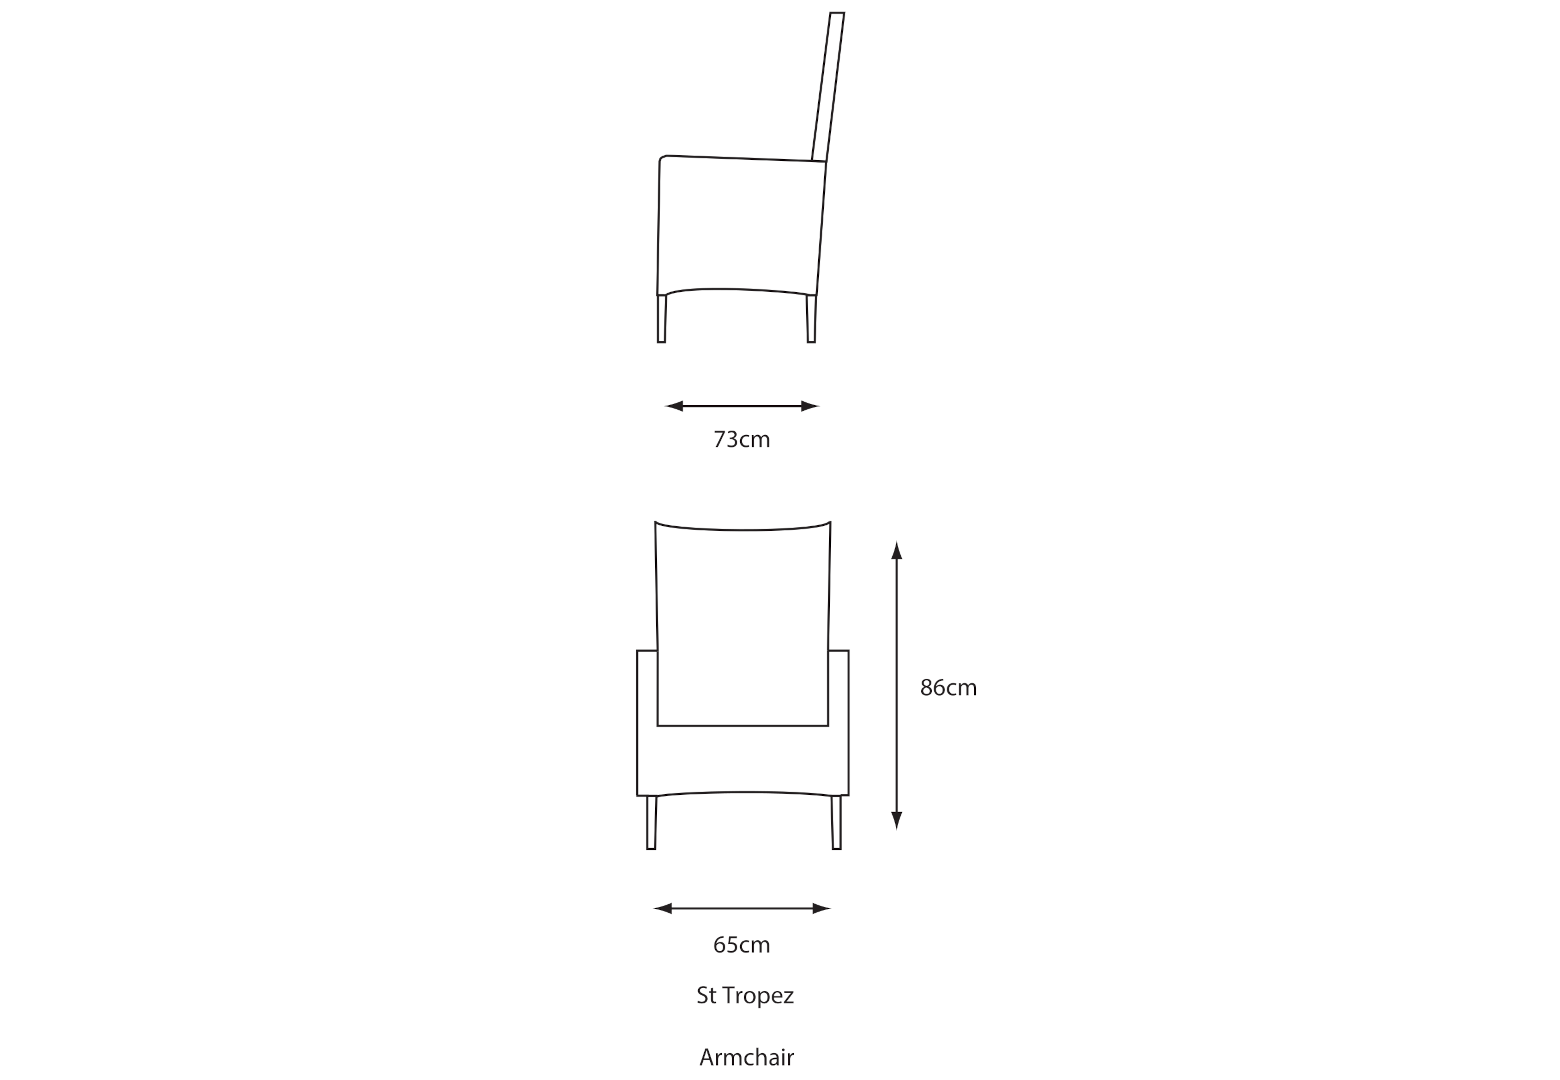 Armchair- dimensions image